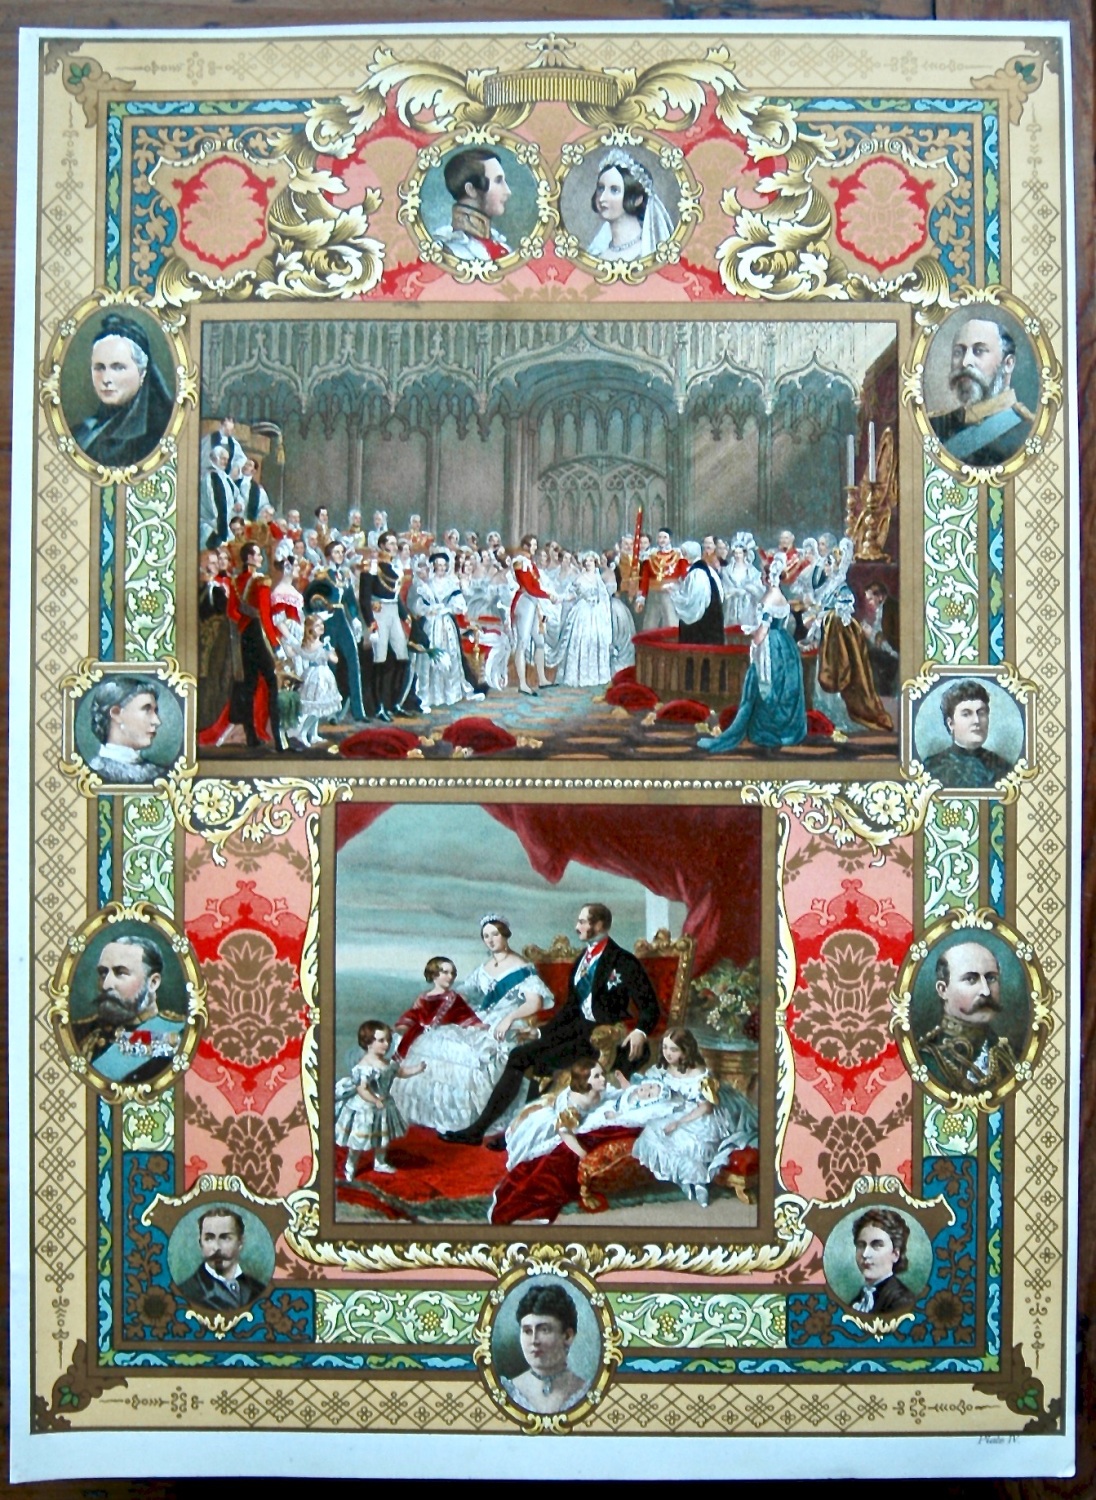 Diamond Jubilee of Queen Victoria.  (Chromo-Lithographic Plate No. IV.)  18